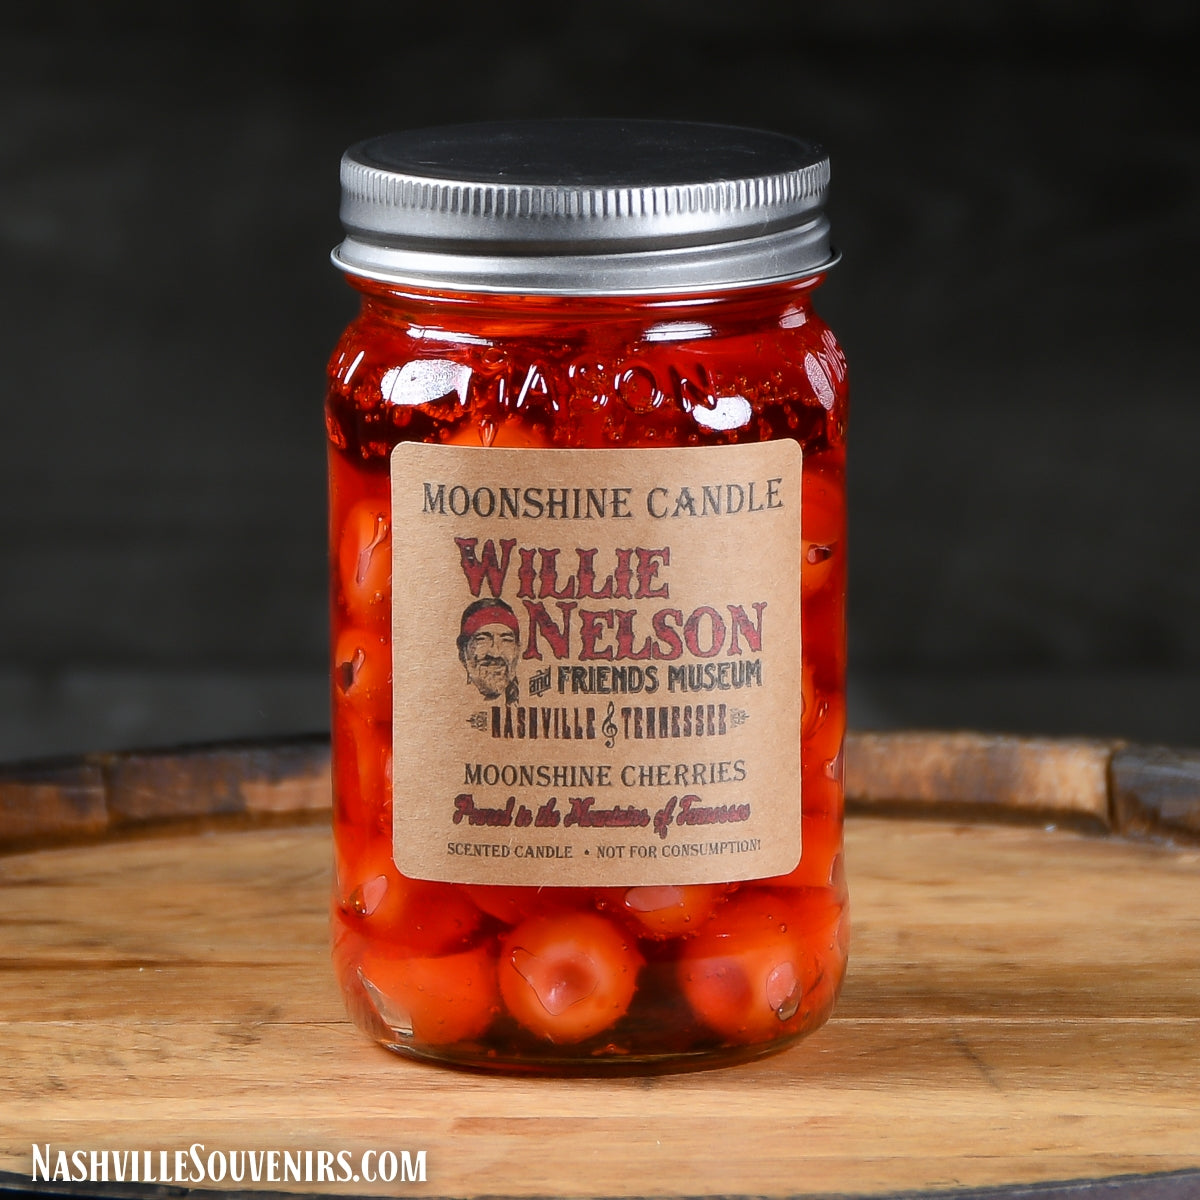 Willie Nelson "Moonshine Cherries" Scented Candle